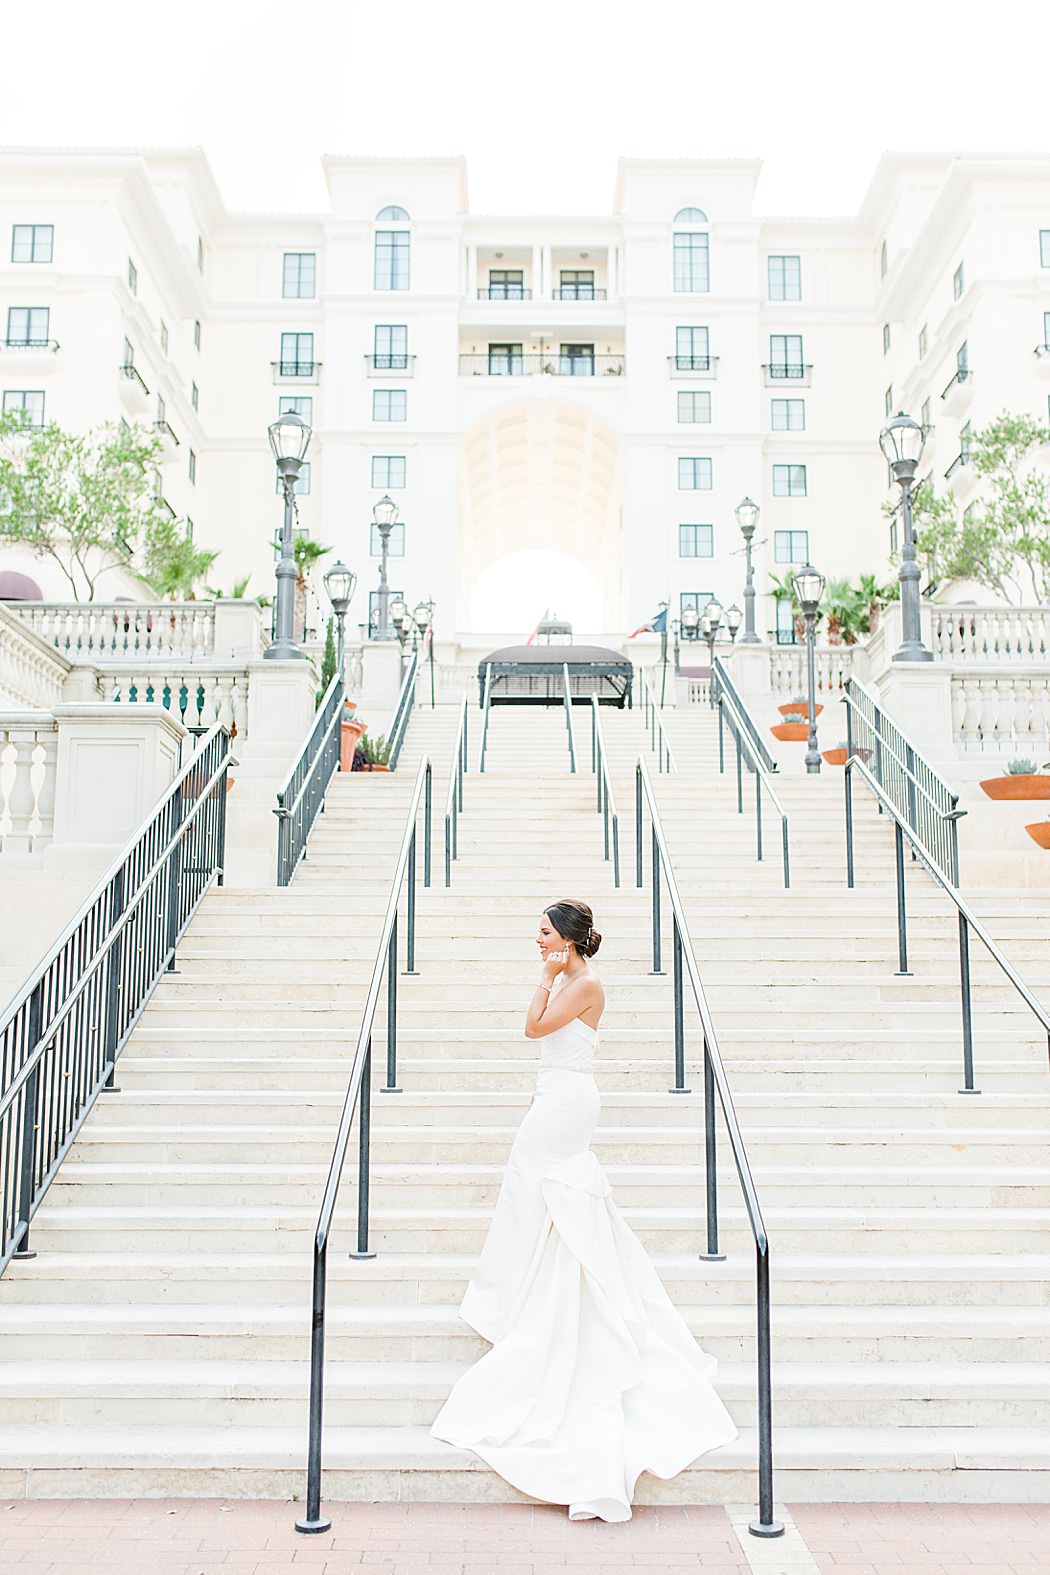 Bridal Photos at The Eilan Hotel in San Antonio Texas By Allison Jeffers Photography 0002